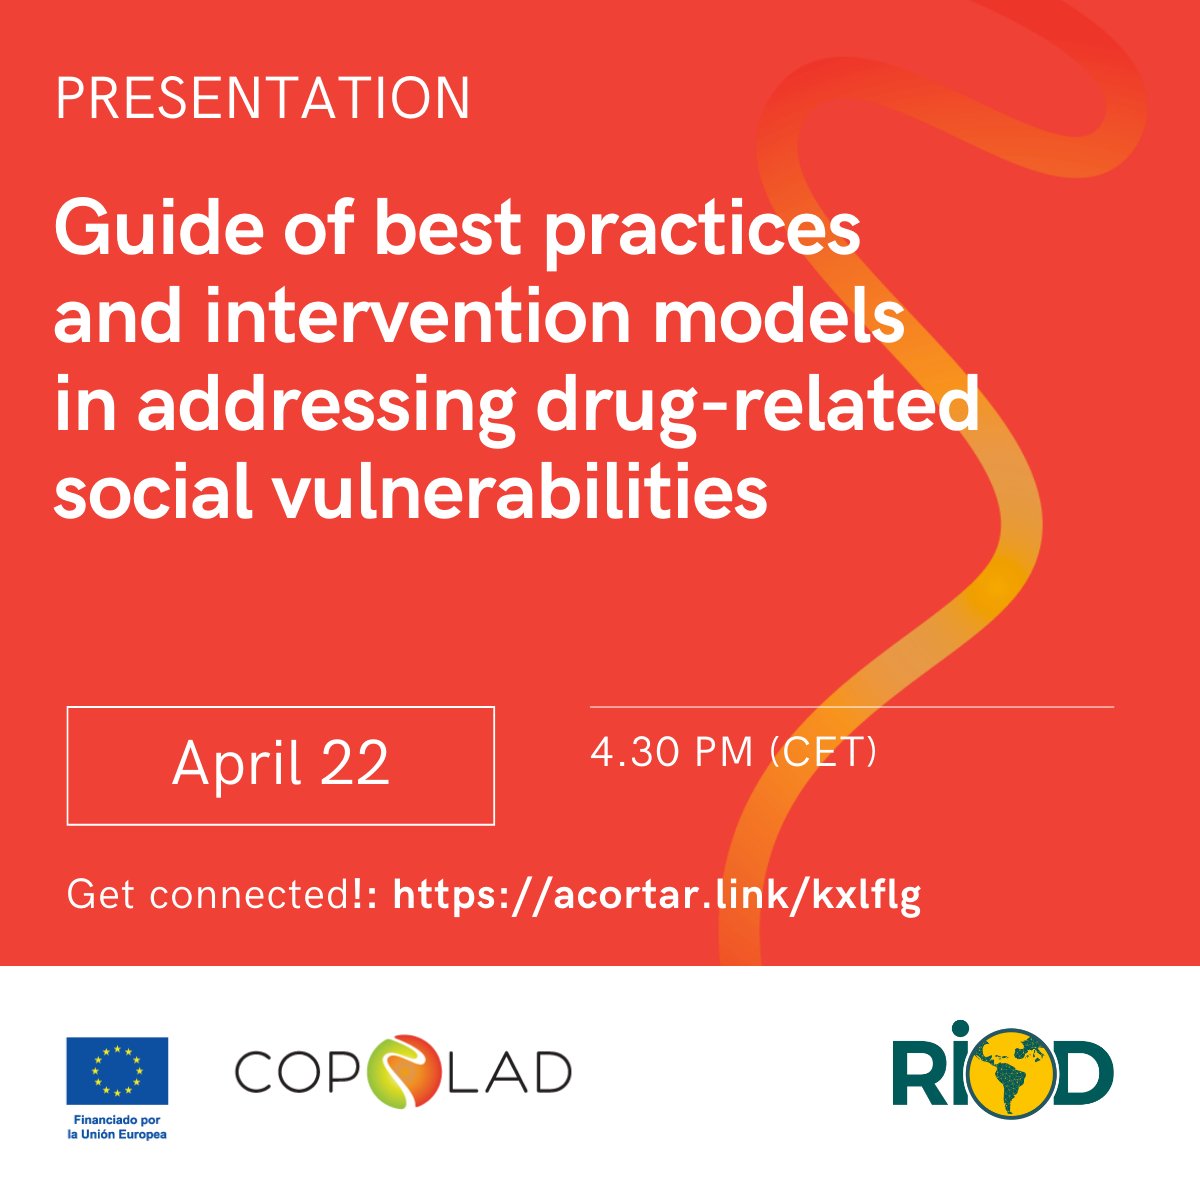 SAVE THE DATE! 🆕 On April 22nd we will present the 'Guide of Good Practices and Models of Intervention in Latin America-Caribbean and EU in addressing social vulnerabilities associated with drugs'. 🔗 Register and connect by Zoom!: i.mtr.cool/iomjlzmdzd